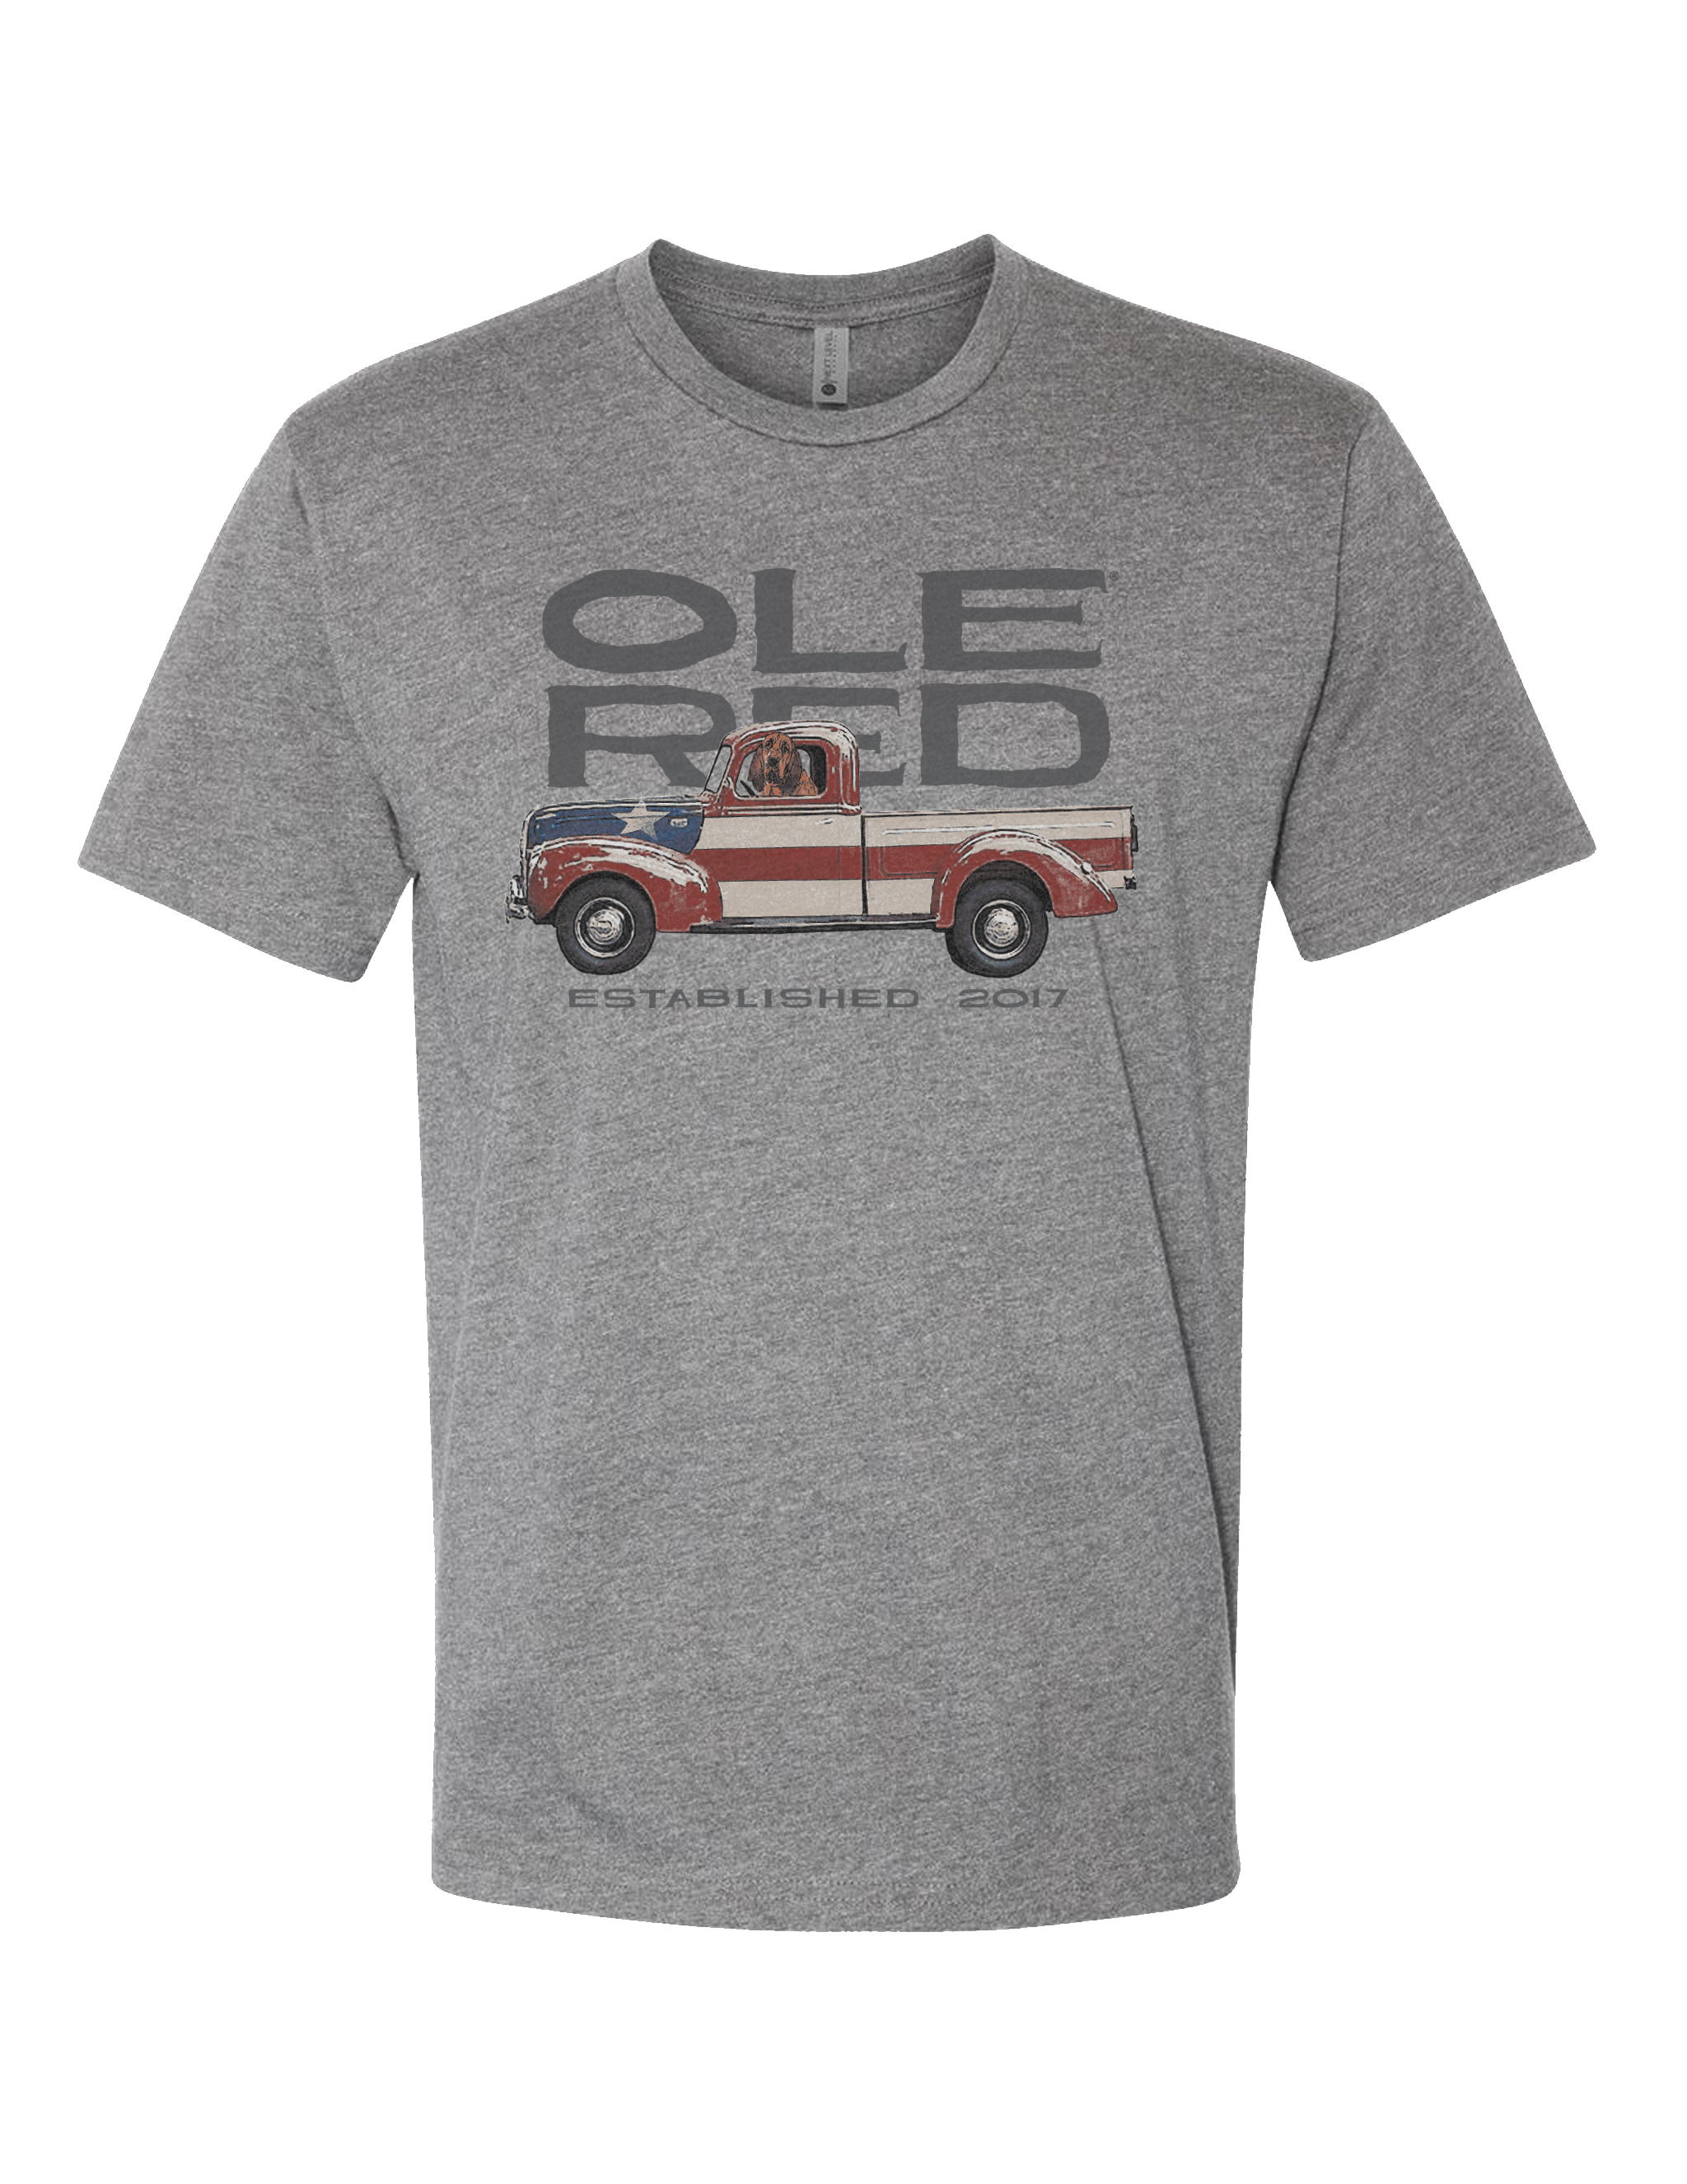 Ole Red Pickup Truck T-Shirt